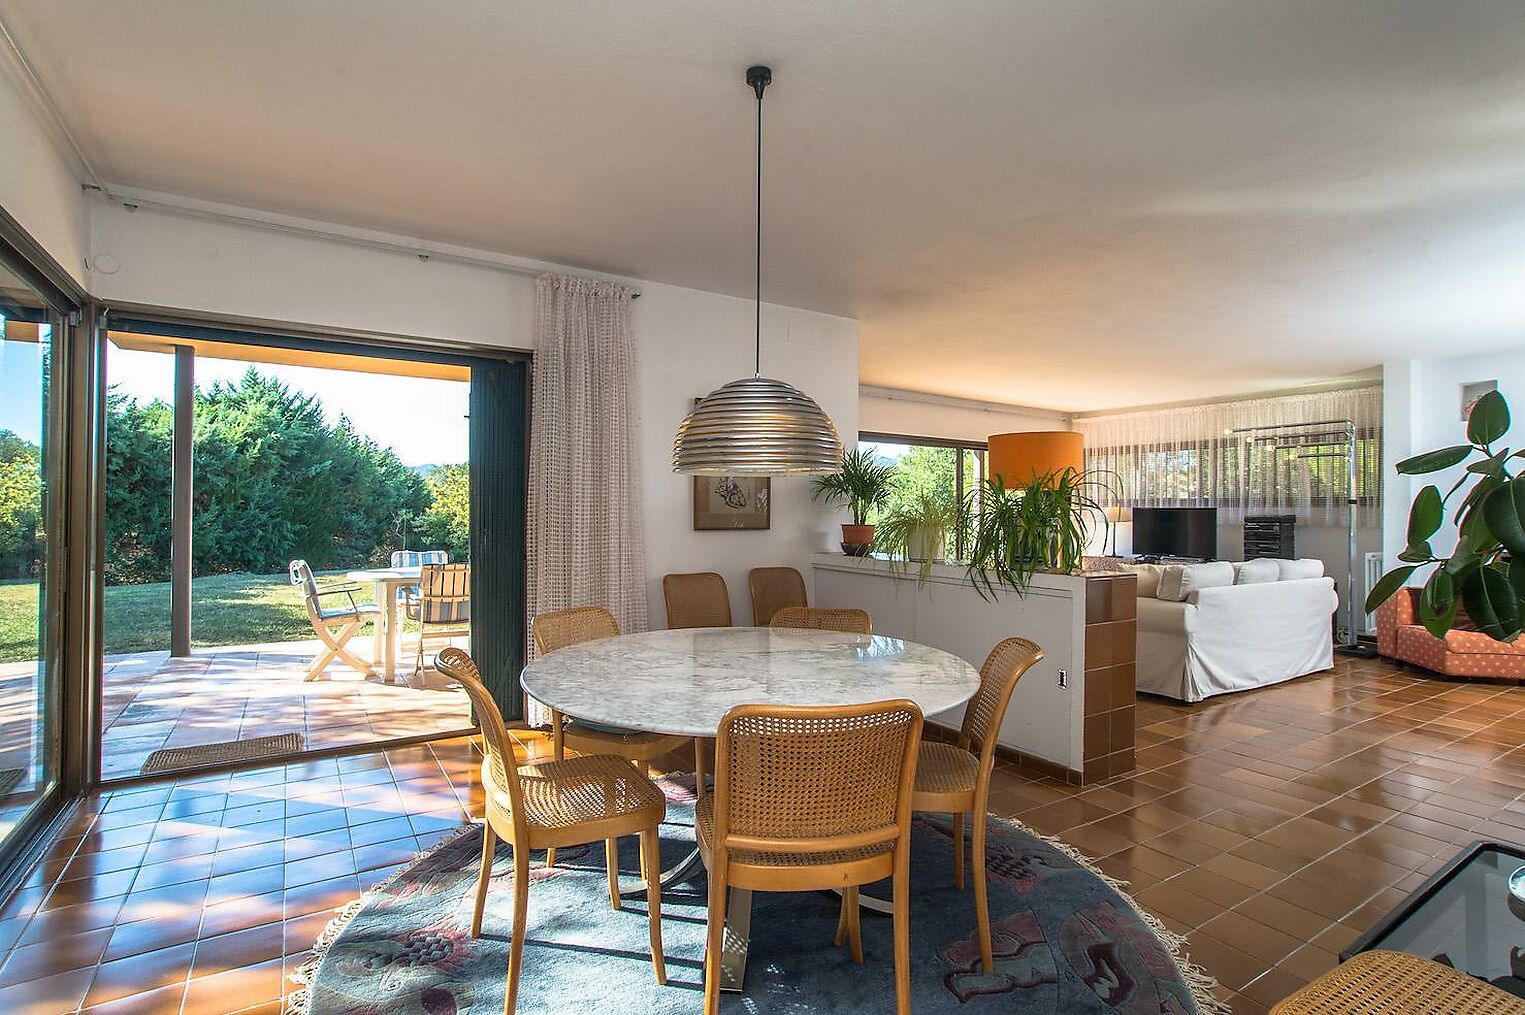 A stunning Catalan villa on a huge plot and walking distance to the centre of the town.